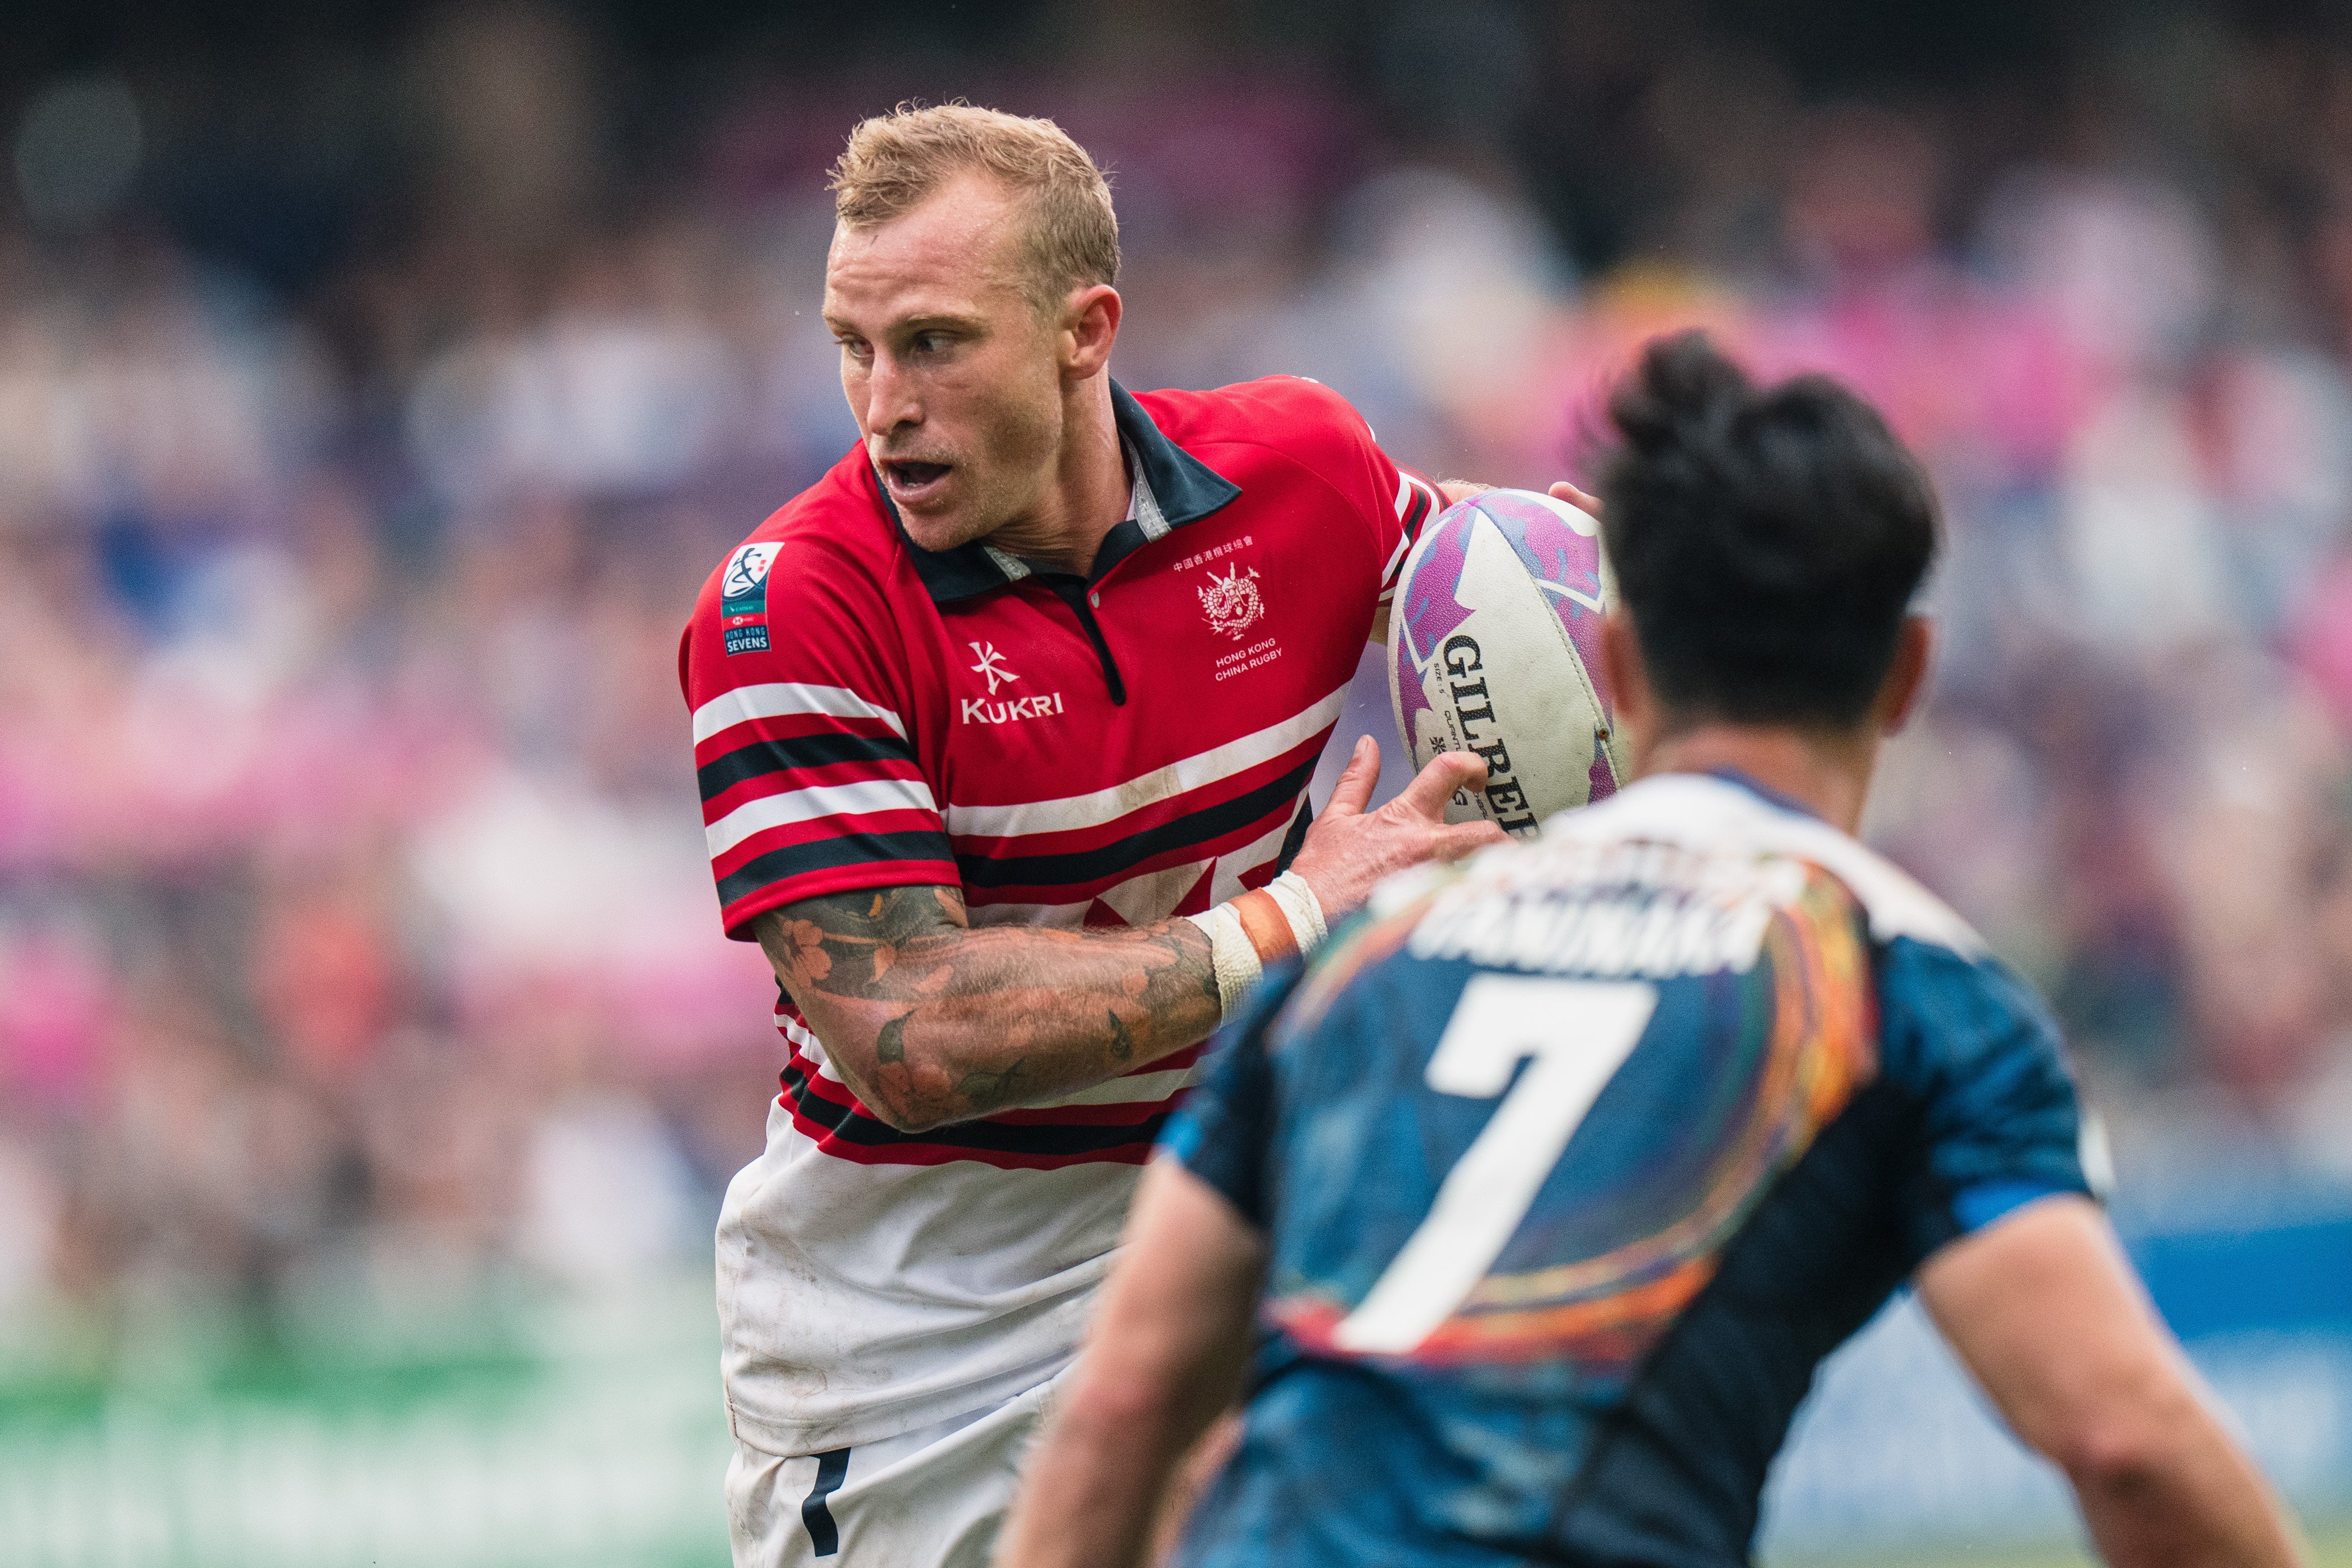 Hong Kong’s National Rugby Sevens team captain Max Woodward shares his thoughts on the future of the city’s athletes with Style. Photo: Clicks Images